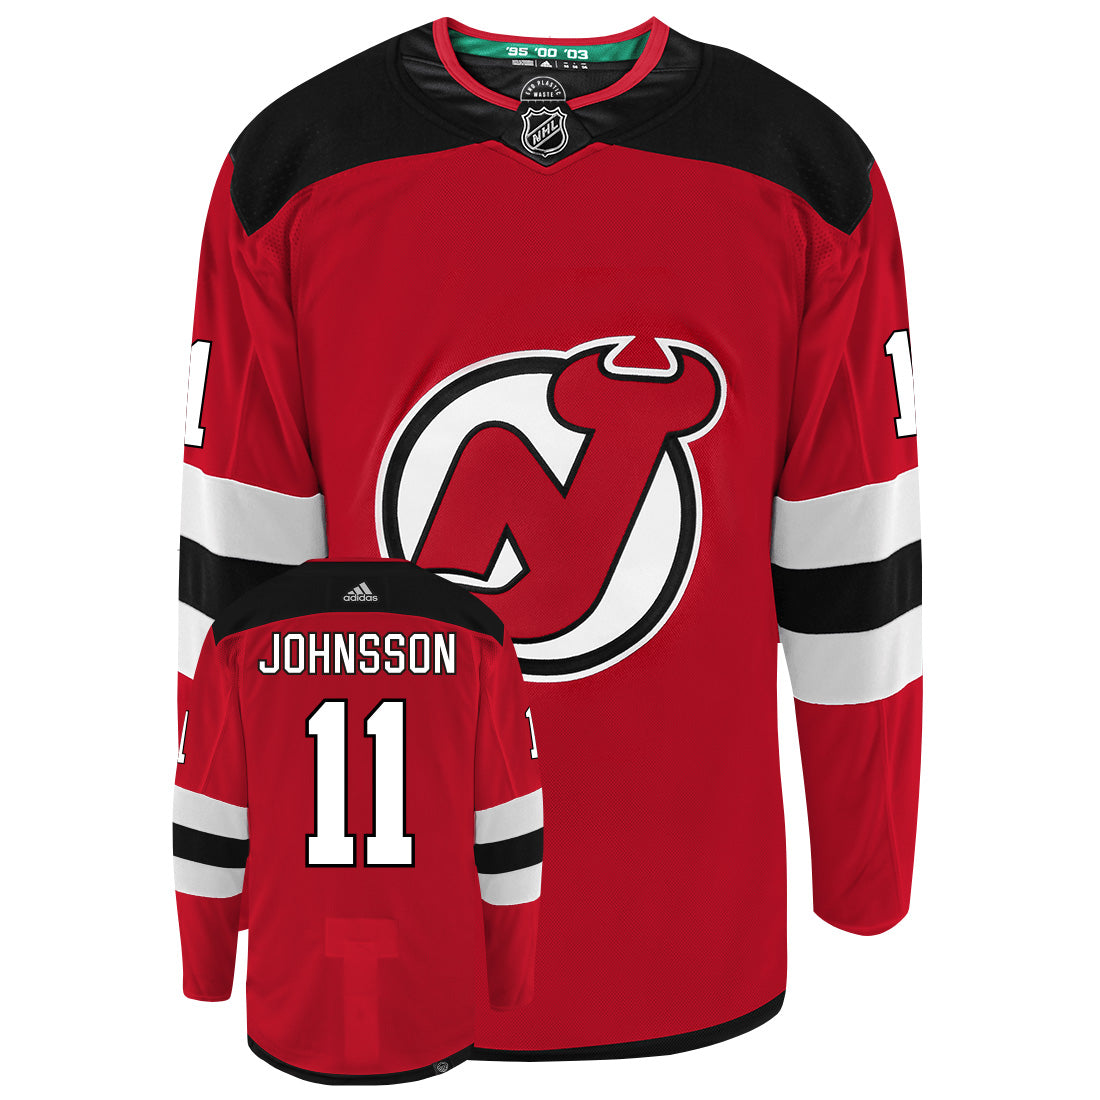 Andreas Johnsson New Jersey Devils Adidas Primegreen Authentic NHL Hockey Jersey - Front/Back View